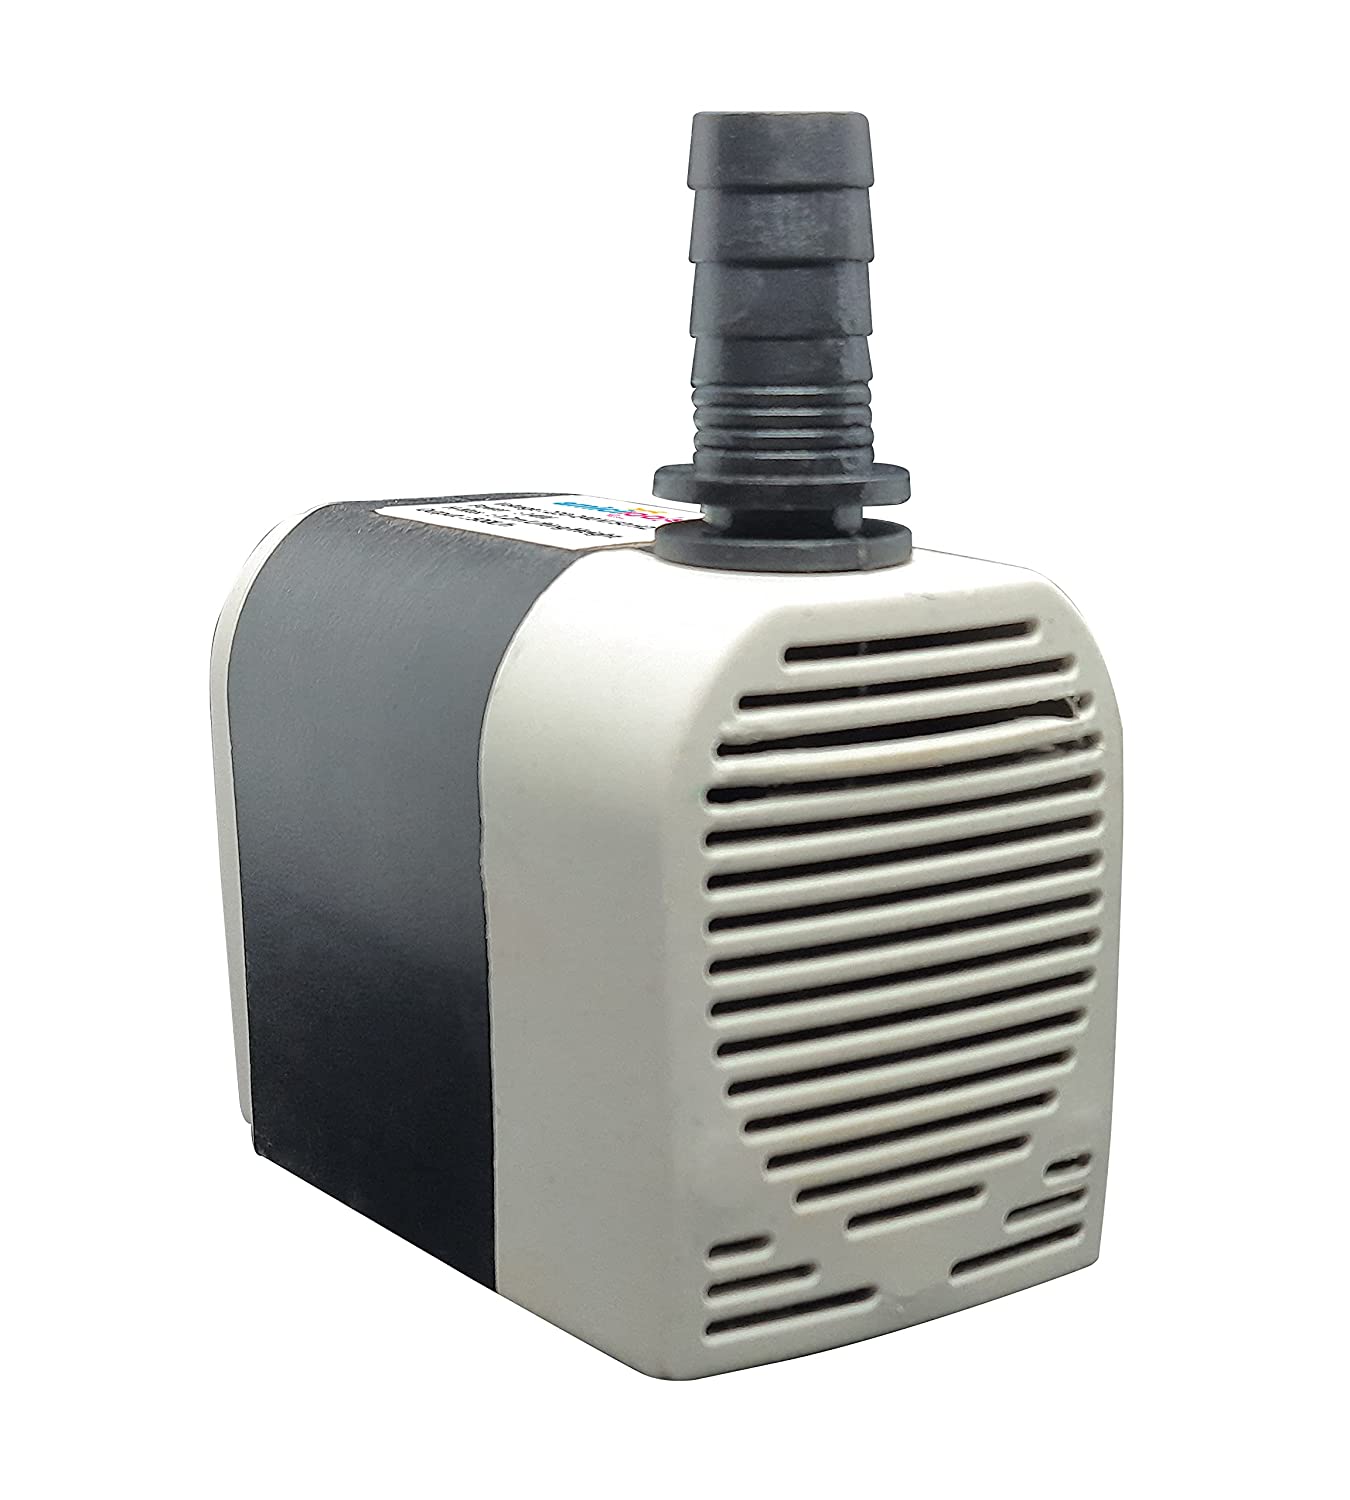 DINGO 14W Submersible Water Pump with 2 Pin Plug